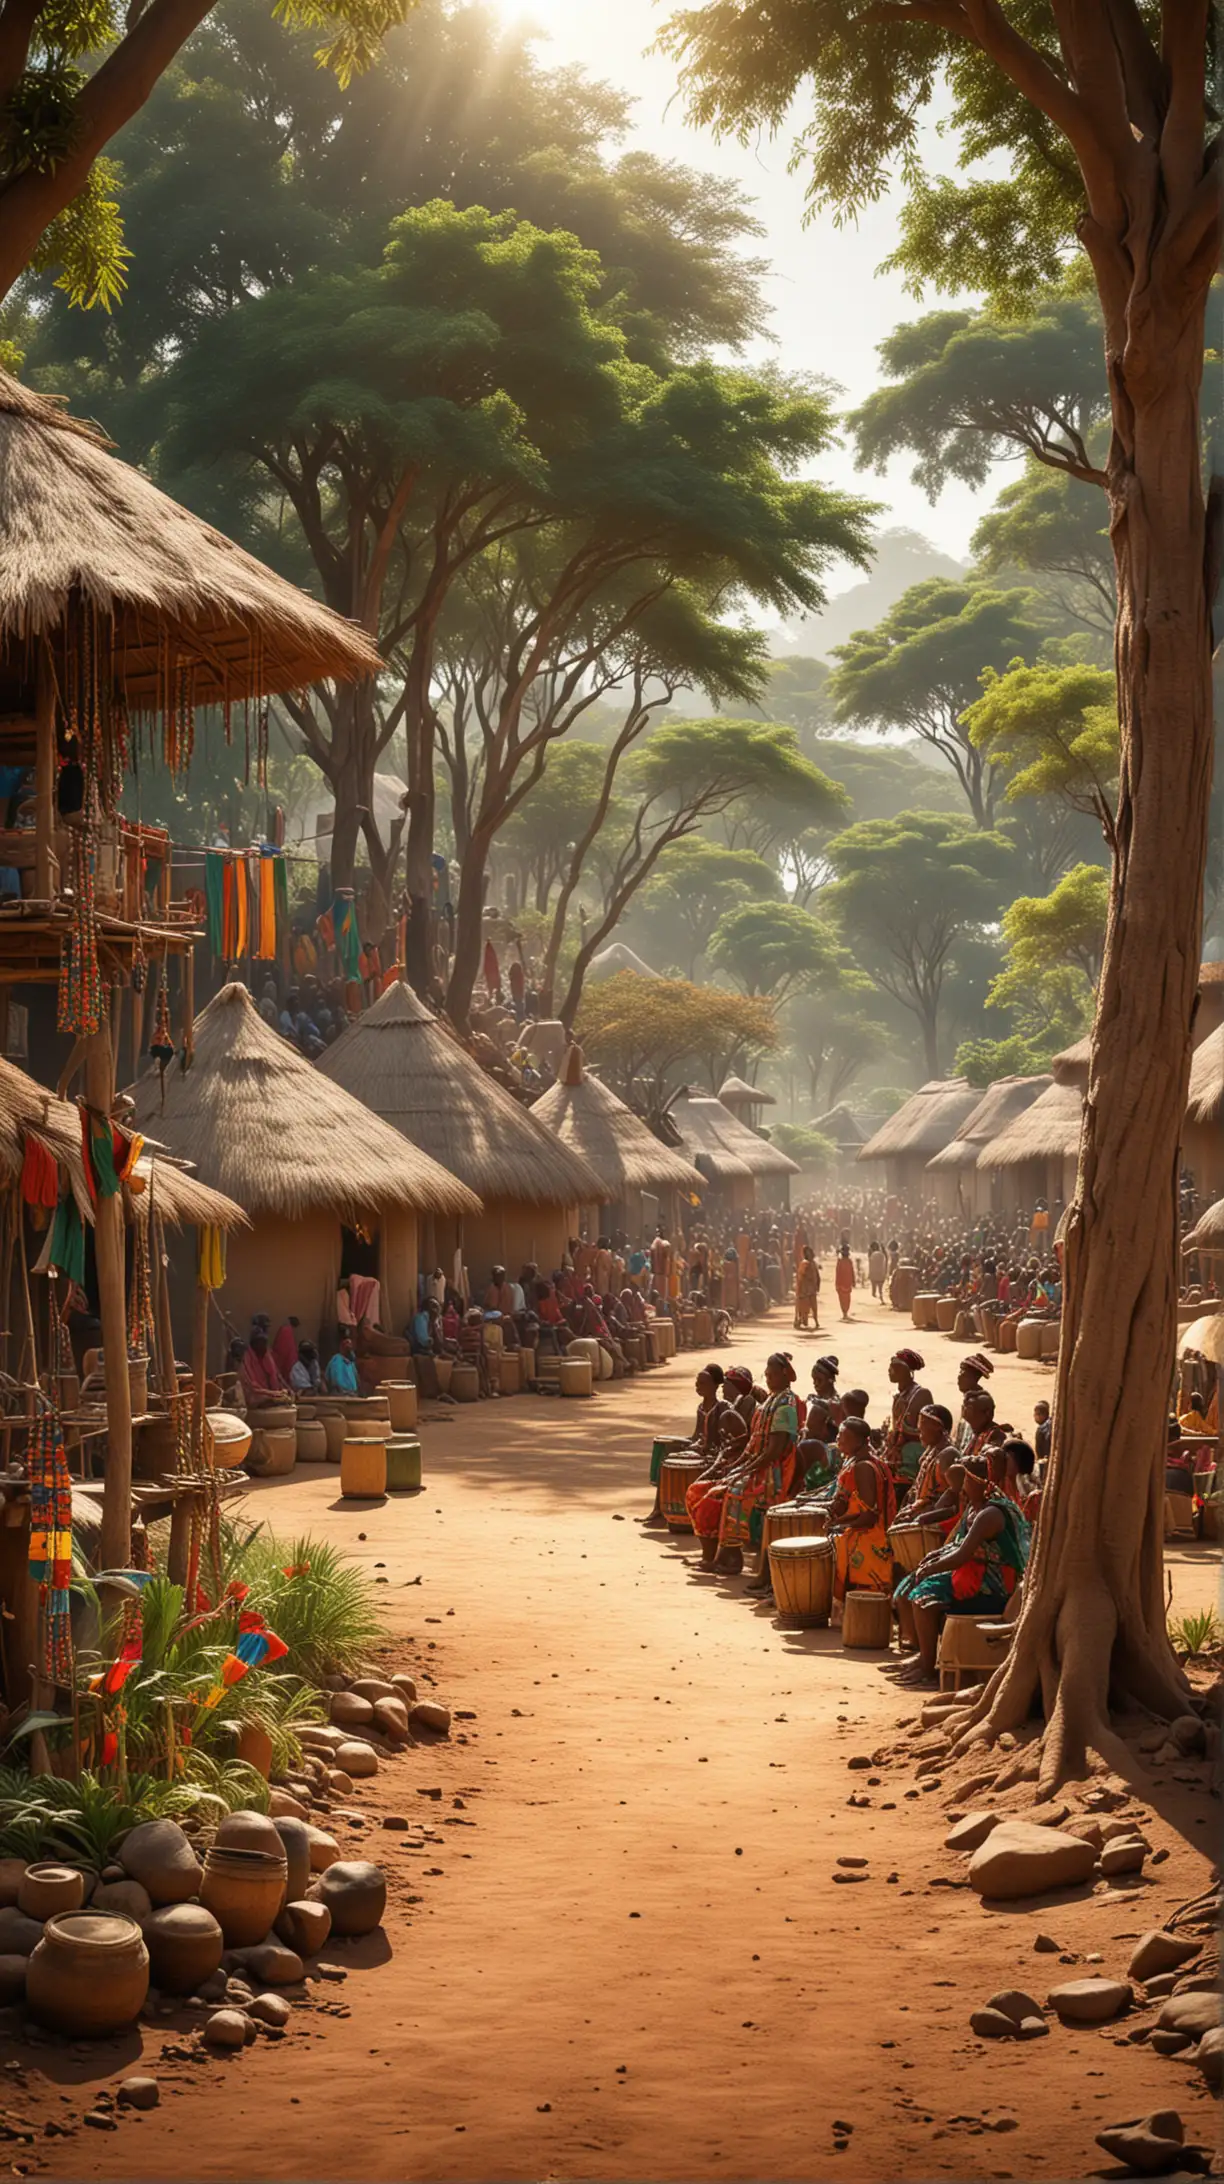 Create an image depicting a vibrant African village scene, with colorful huts clustered together under the shade of tall trees. In the center of the village, a group of people gathers around a communal fire, adorned in traditional attire and jewelry. Some individuals have intricately pierced lips and ears, with shimmering beads and metal ornaments dangling from their piercings, reflecting the sunlight. The atmosphere is alive with the sounds of drumming and singing, as the community celebrates a cultural festival or ritual. In the background, the rolling hills and lush greenery of the African landscape stretch into the distance, imbuing the scene with a sense of natural beauty and tranquility. Hyper realistic